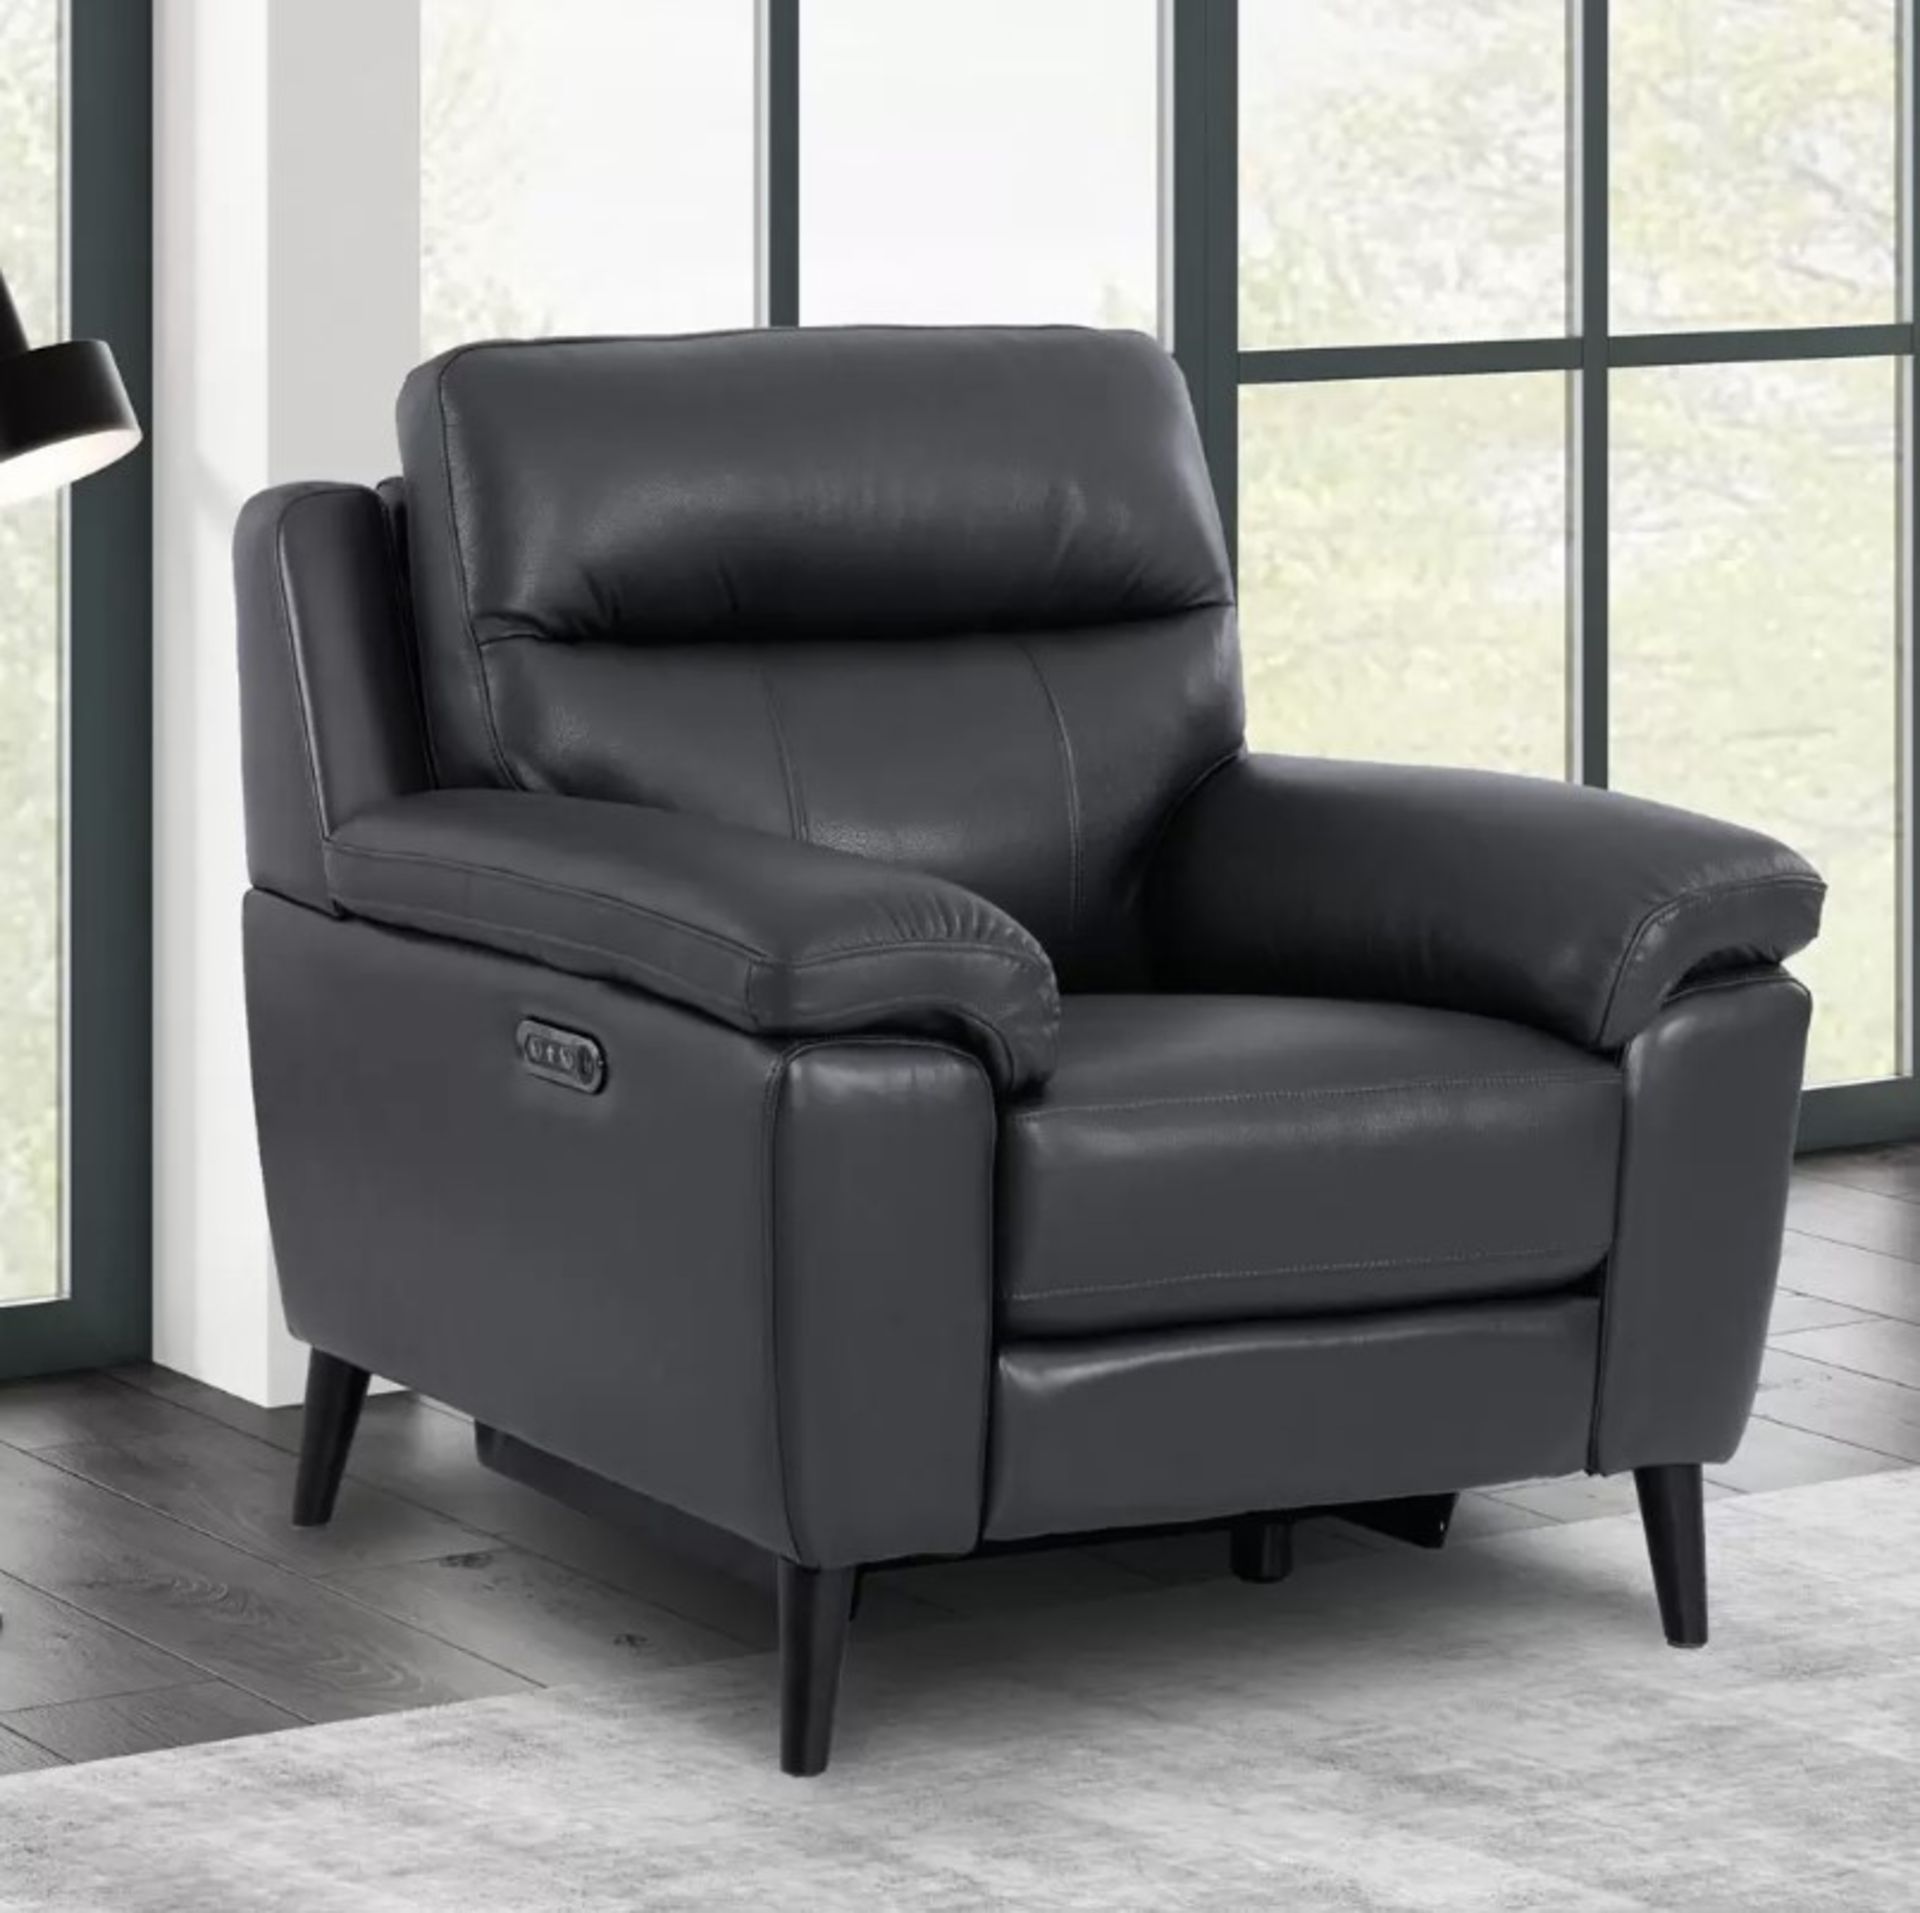 1 GRACE DARK GREY LEATHER POWER RECLINING ARMCHAIR RRP Â£699 (PICTURES FOR ILLUSTRATION PURPOSES